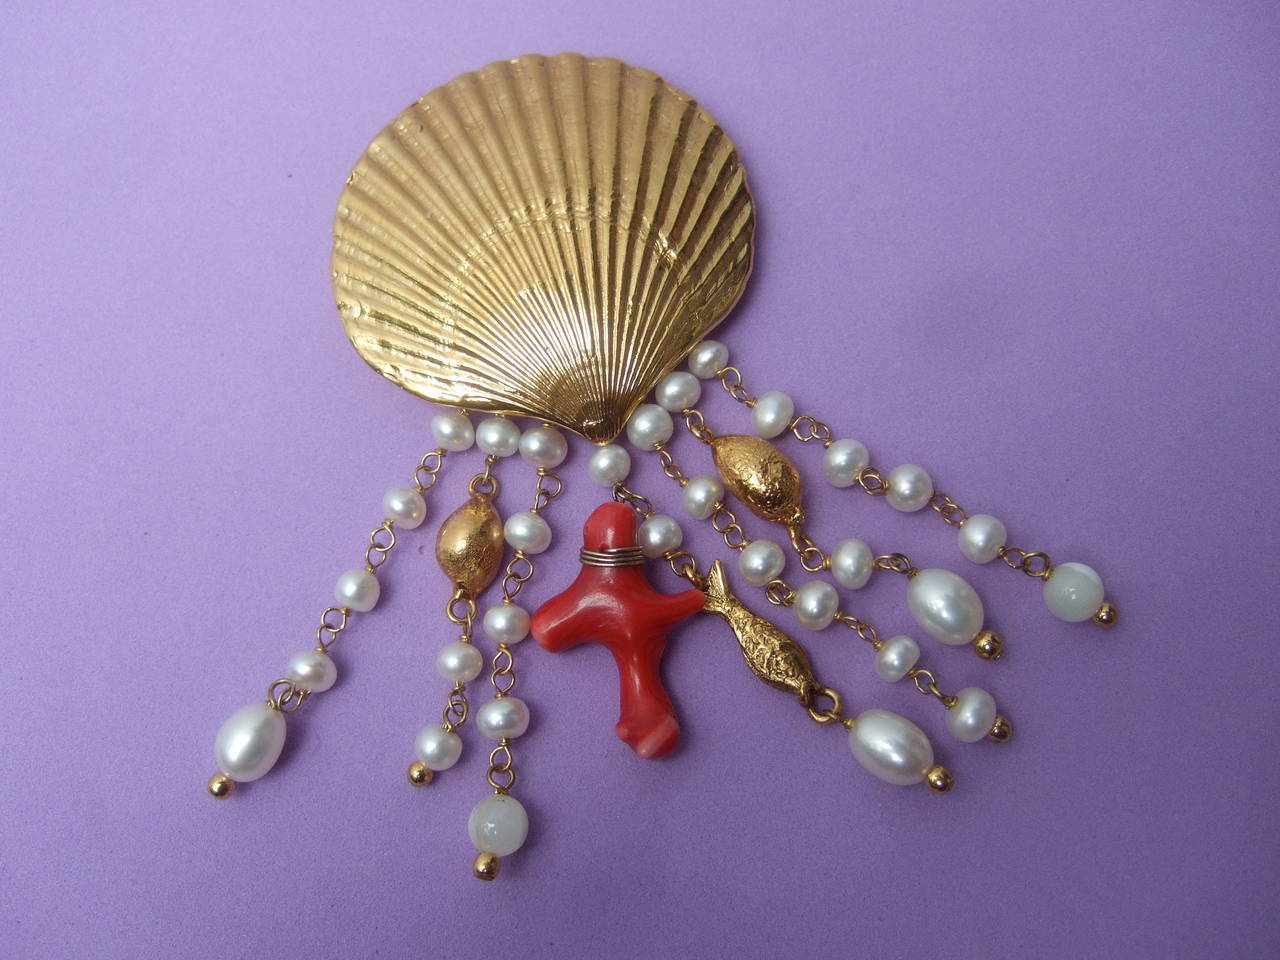 Goossen's Paris Gilt scallop shell sea life brooch c 1990
The elegant designer brooch is adorned with a gilt
metal scallop with rows of dangling embellishments 

The brooch is designed with rows of resin enamel
pearls interspersed with two gilt